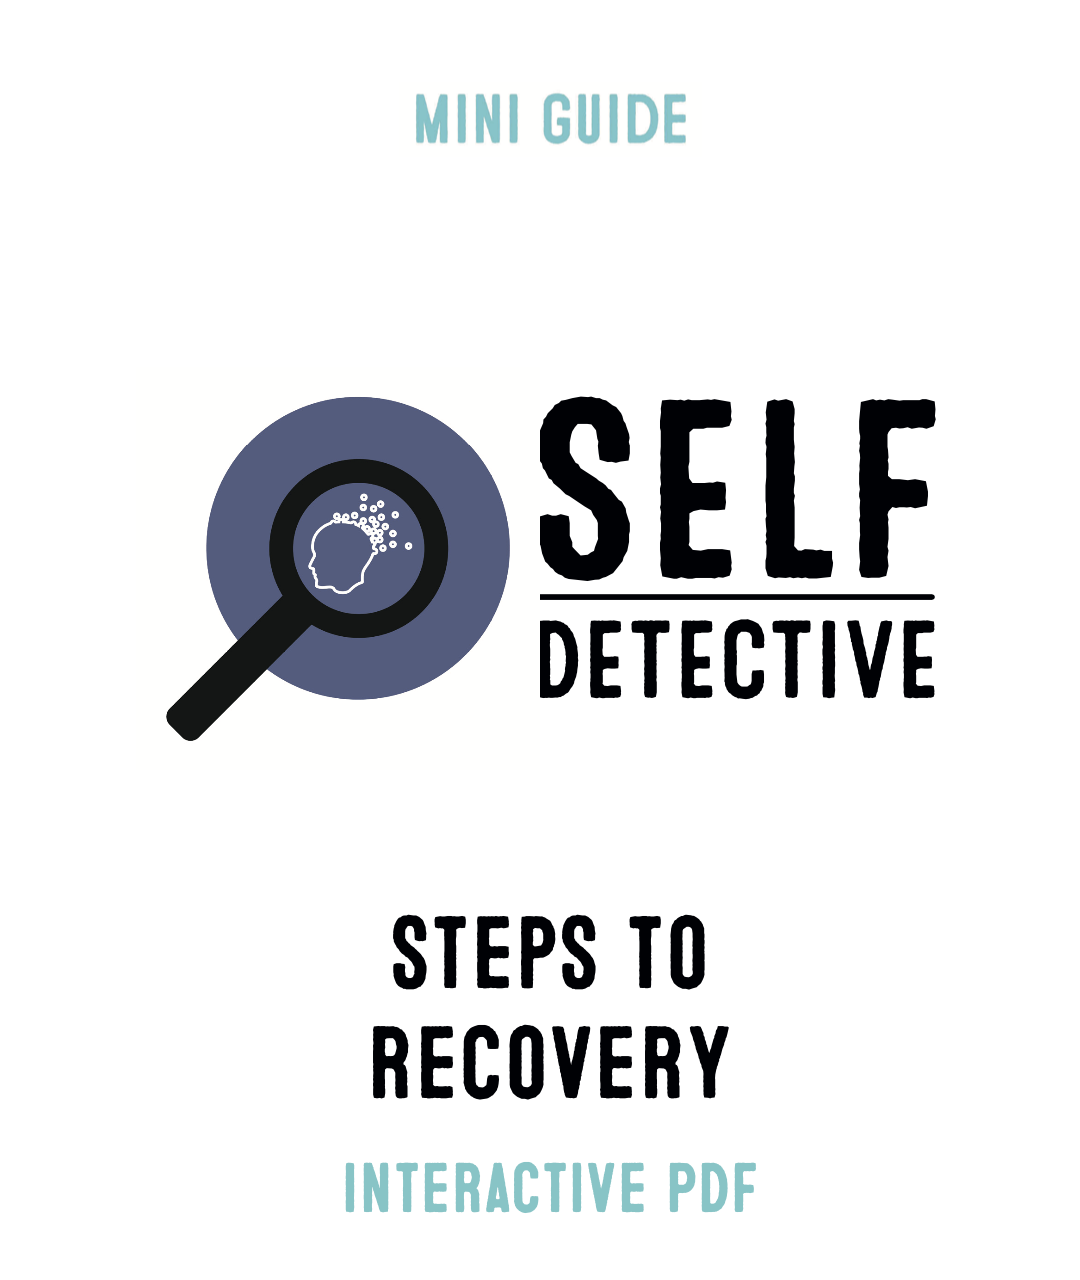 Steps To Recovery (Interactive PDF version)